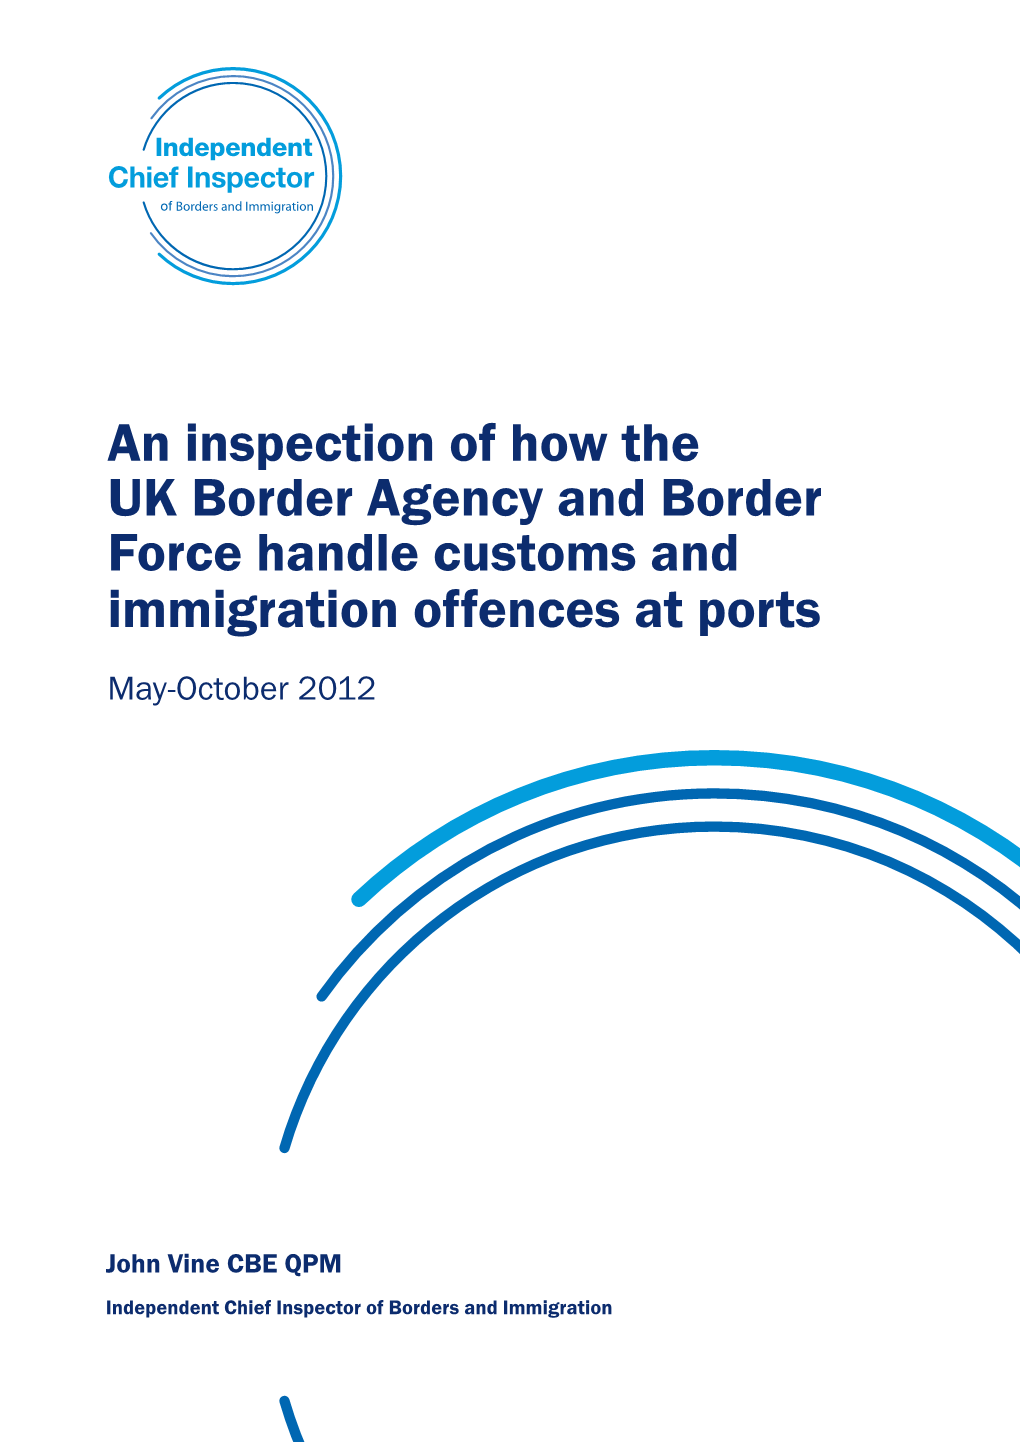 An Inspection of How the UK Border Agency and Border Force Handle Customs and Immigration Offences at Ports May-October 2012